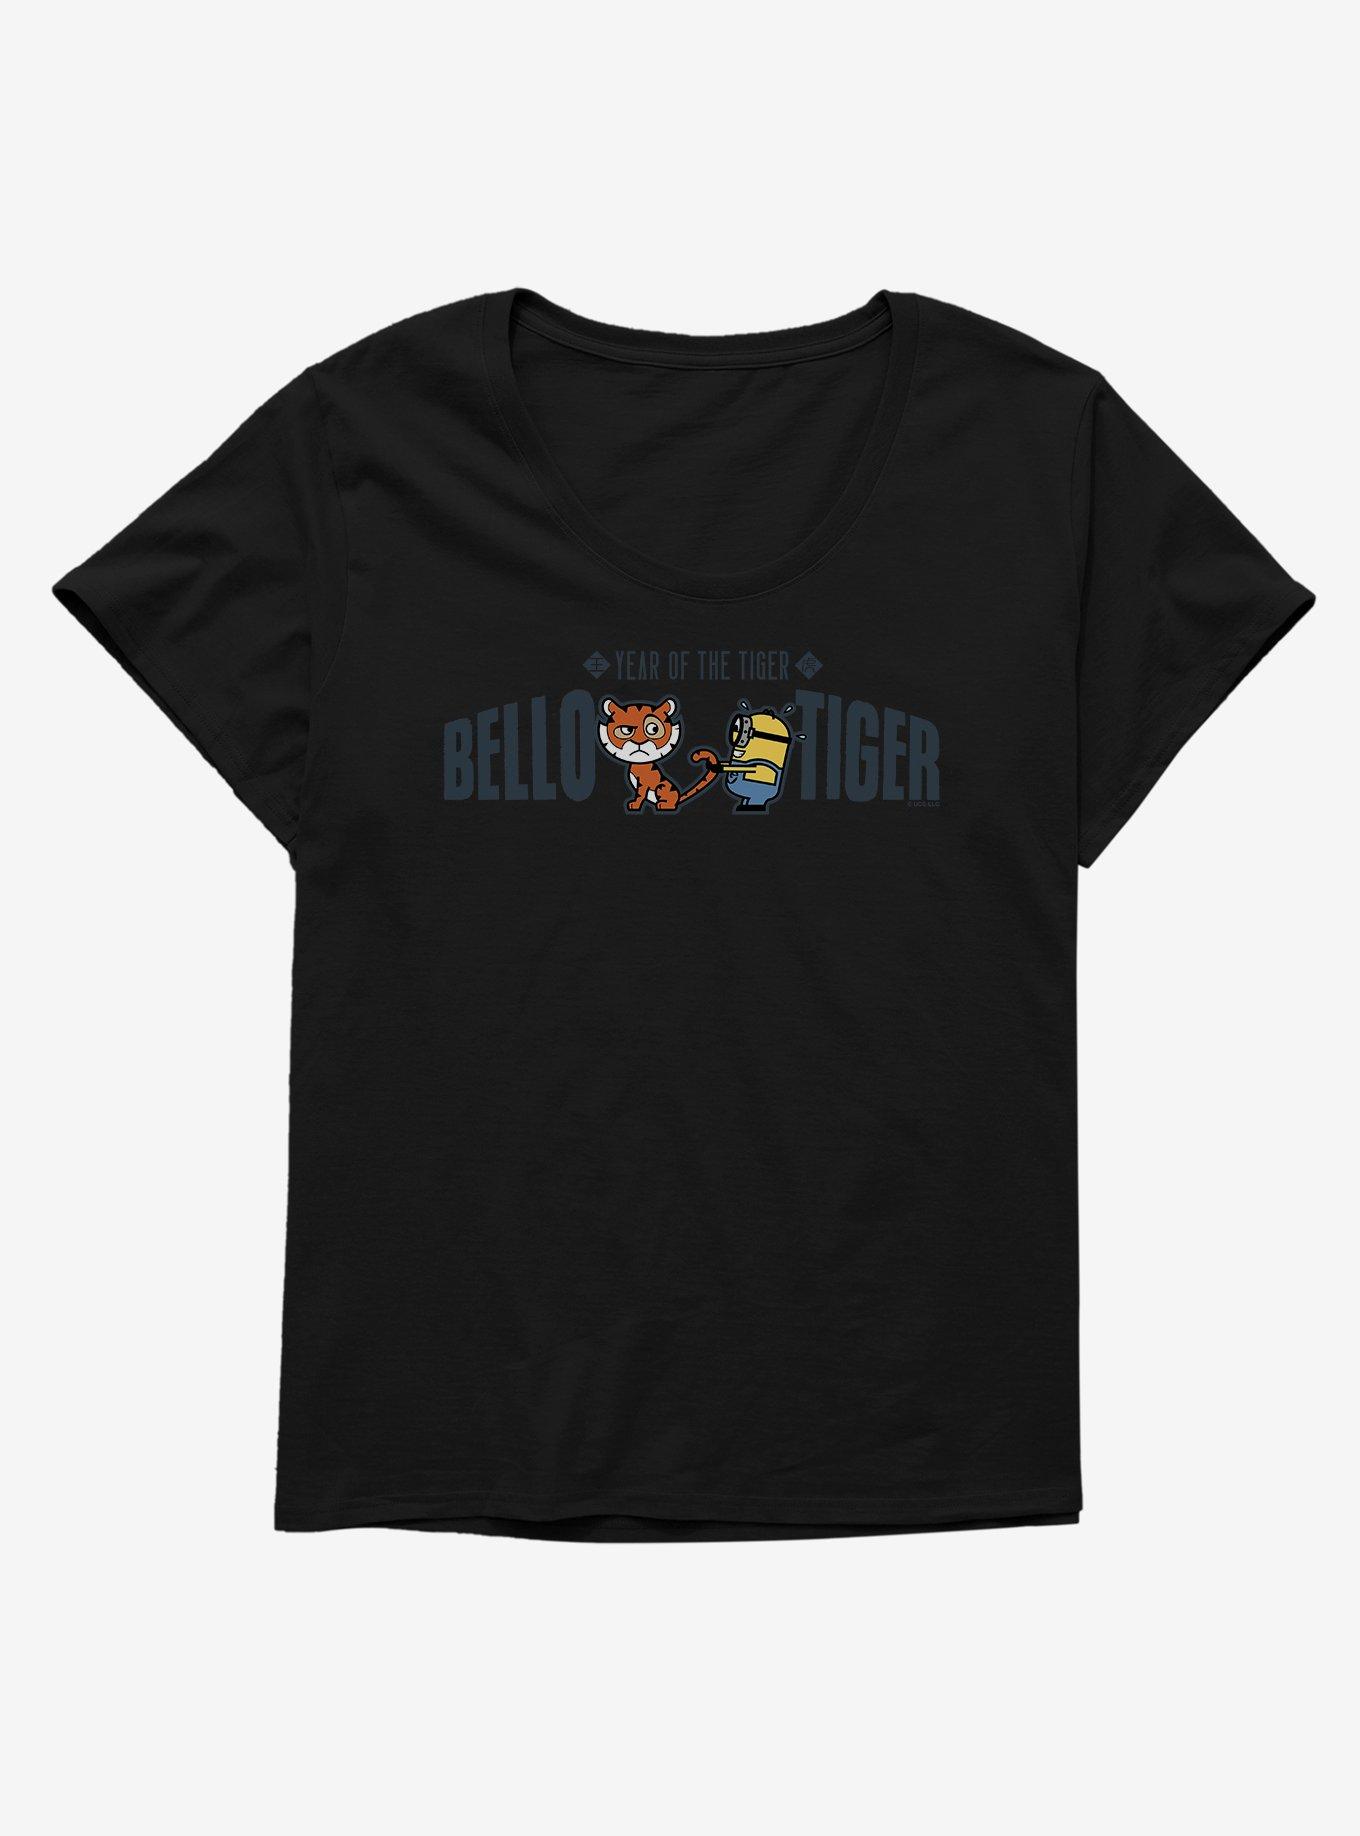 Minions Year of the Tiger Bello Style Girls T-Shirt Plus